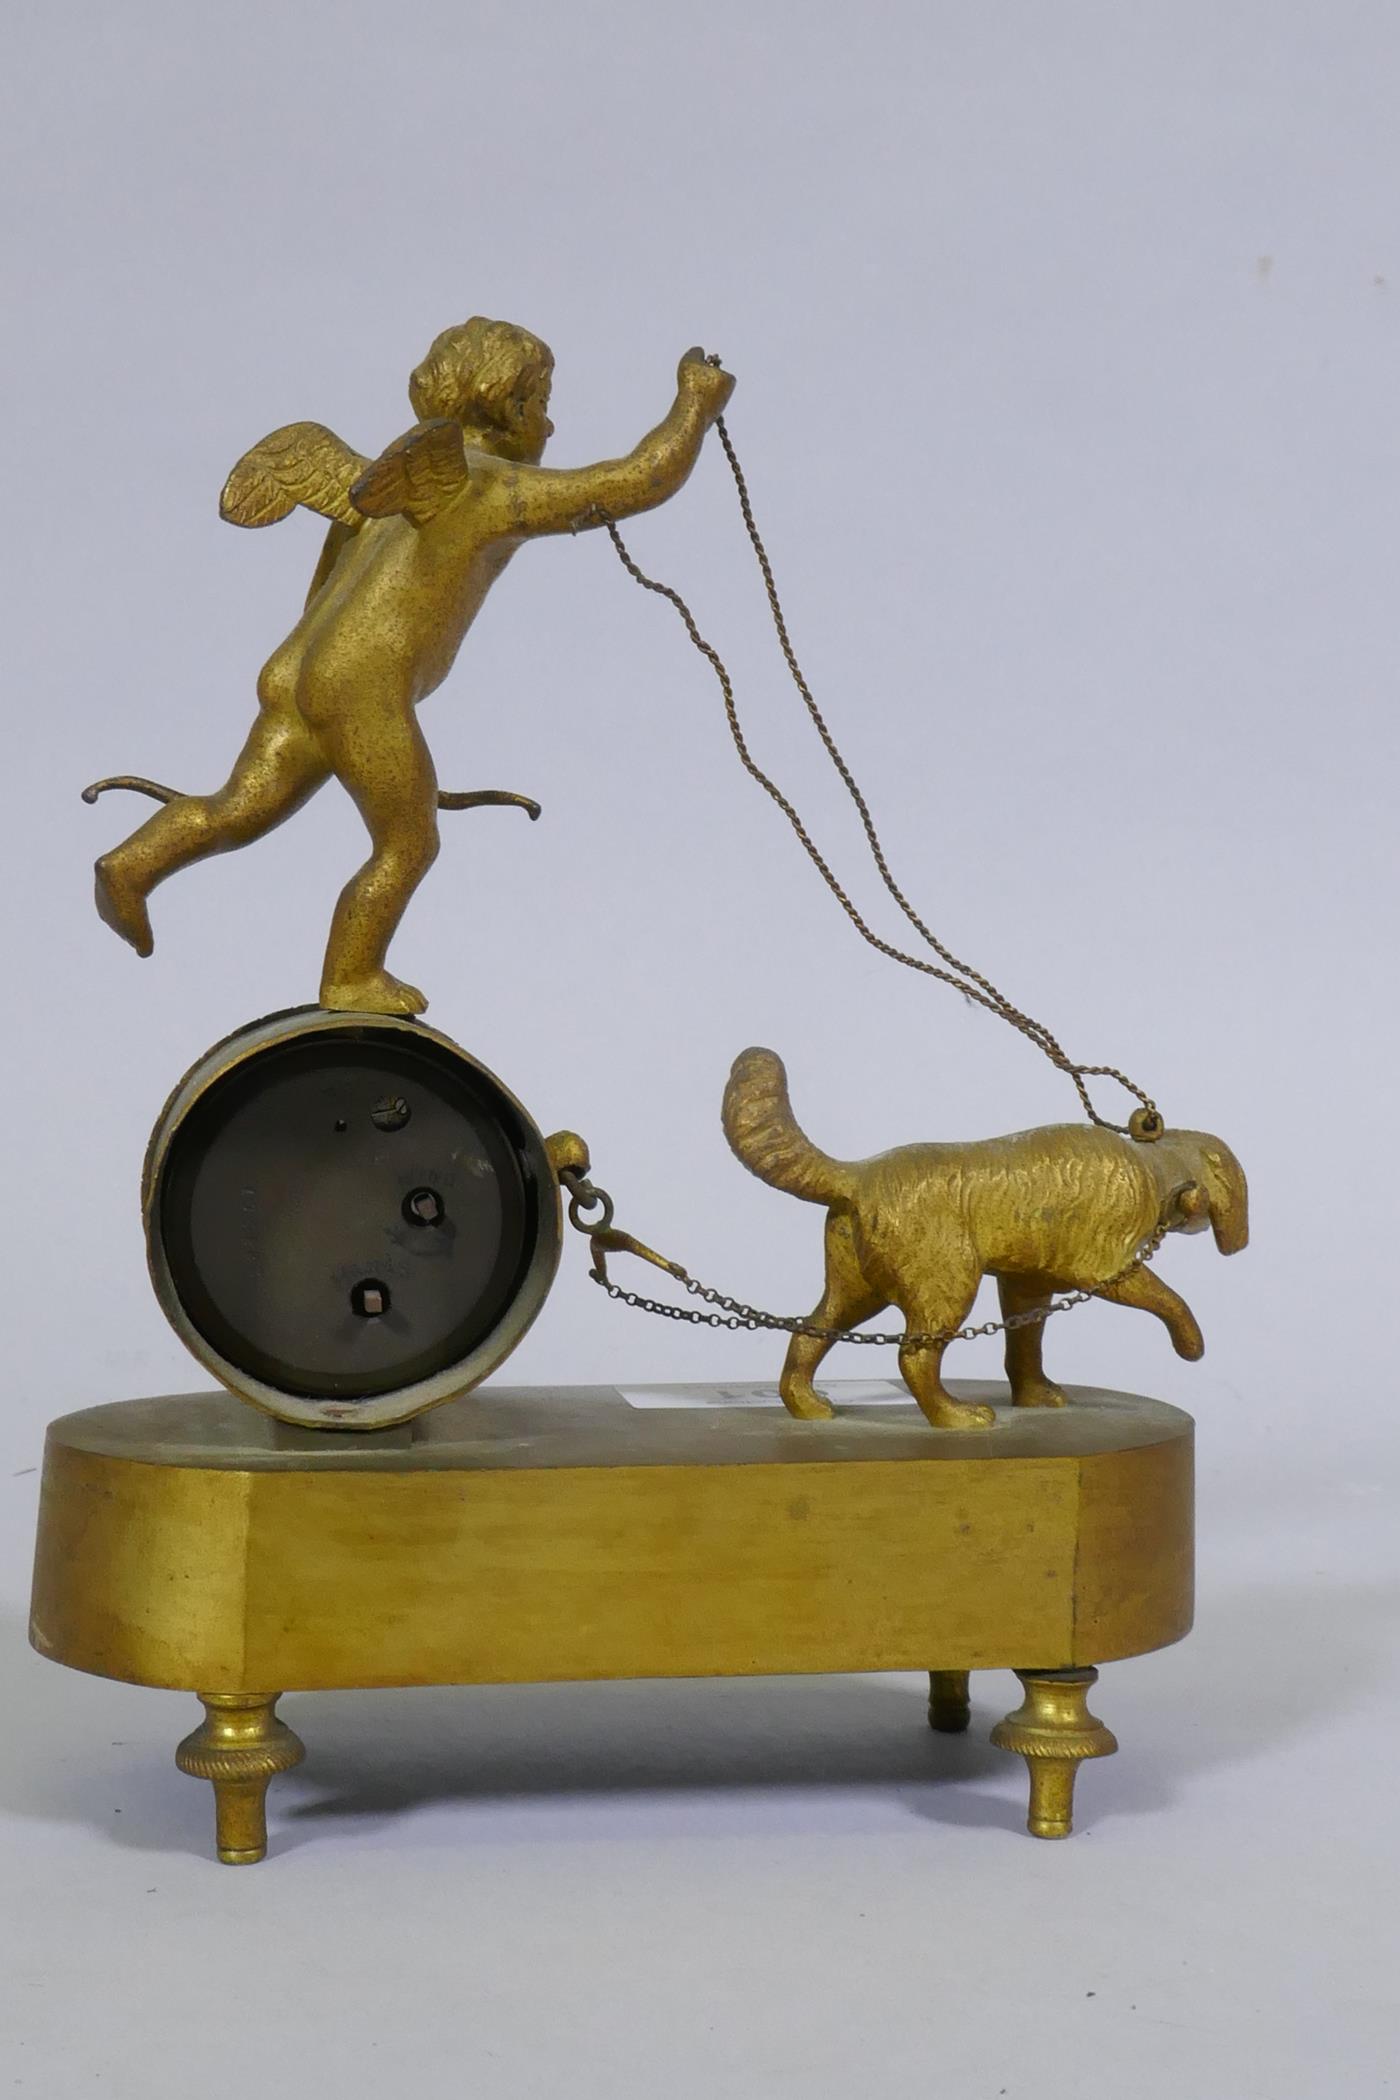 A C19th French Empire Style ormolu mantel clock, with putto and dog, and anthemion decoration, - Image 2 of 5